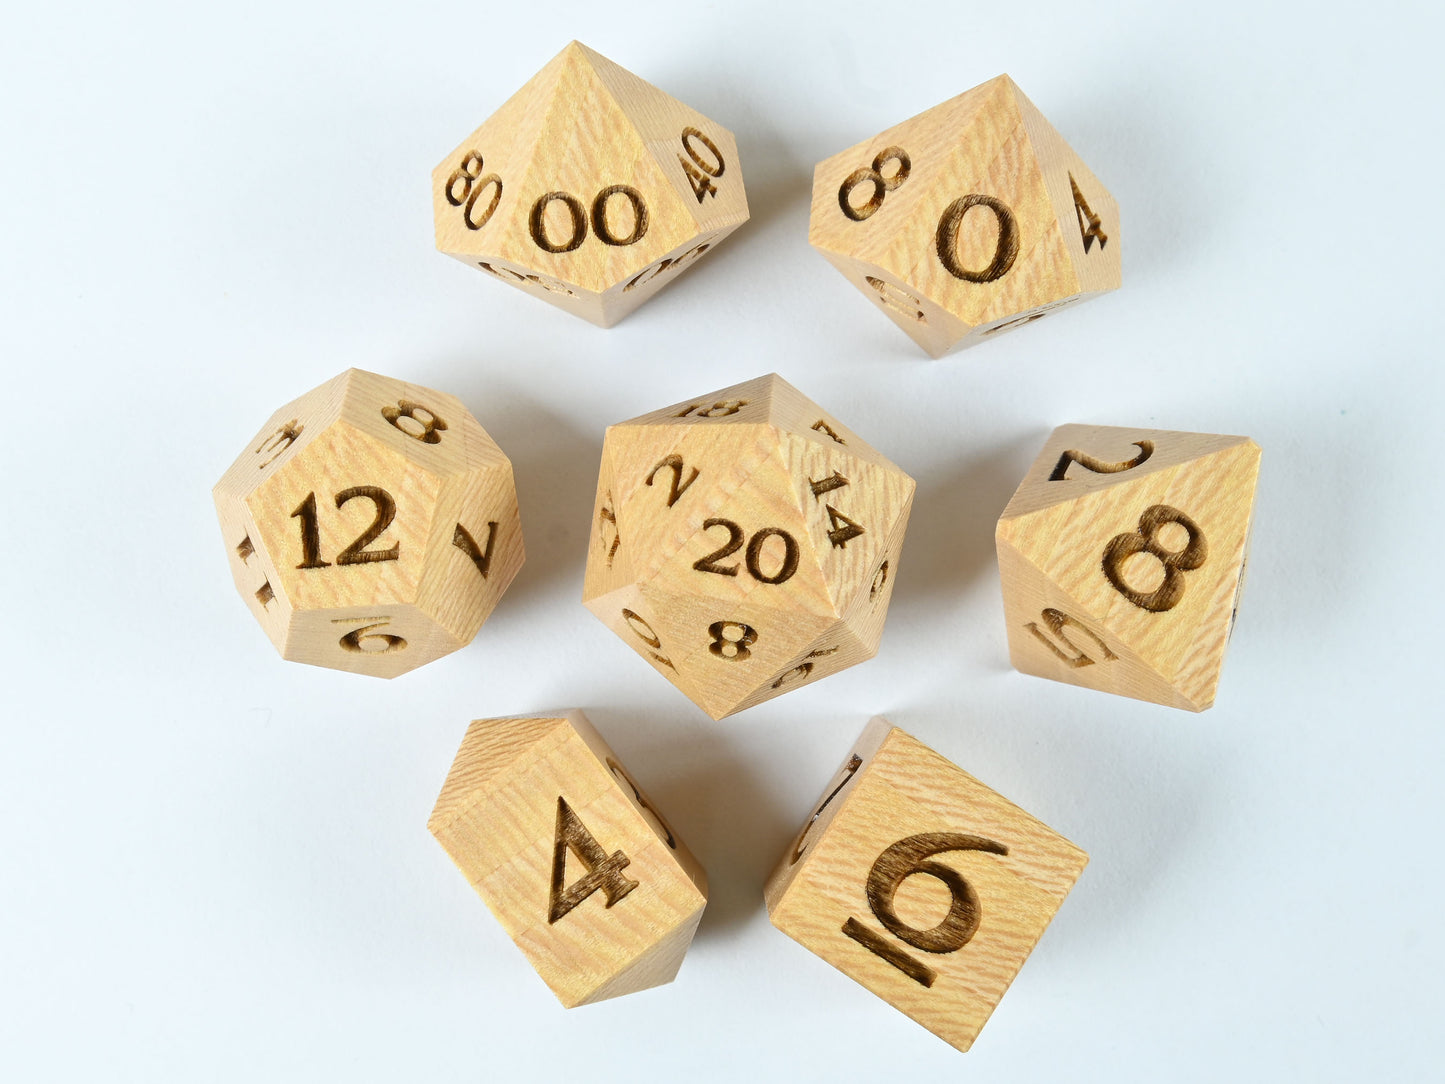 Sycamore wood dice set for dnd rpg